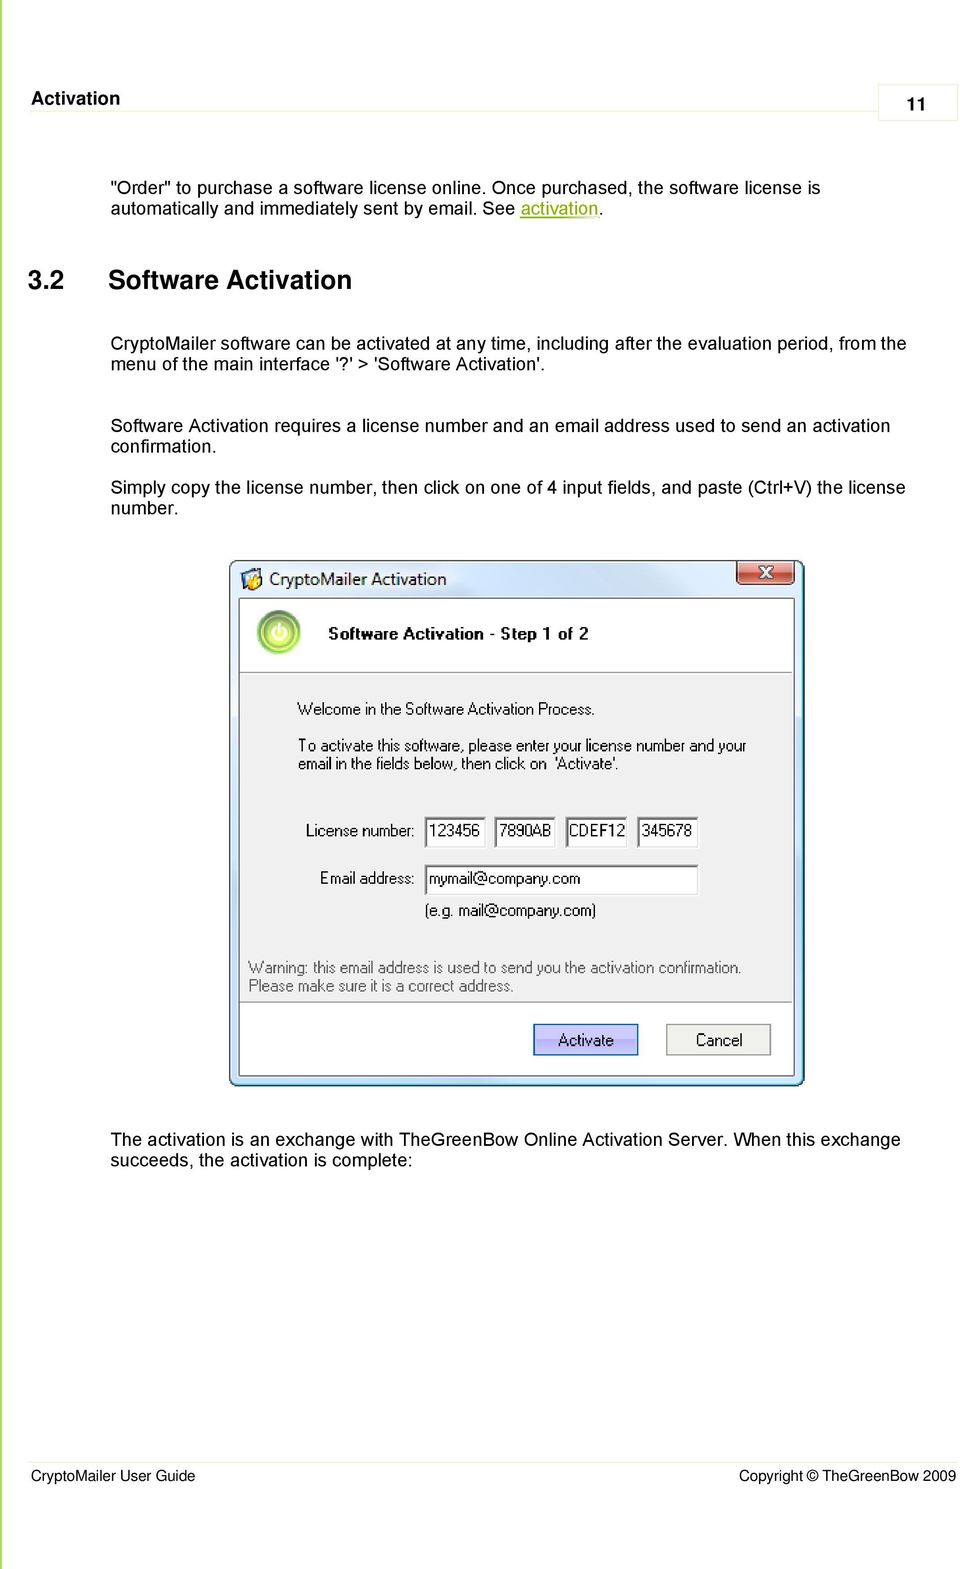 ' > 'Software Activation'. Software Activation requires a license number and an email address used to send an activation confirmation.